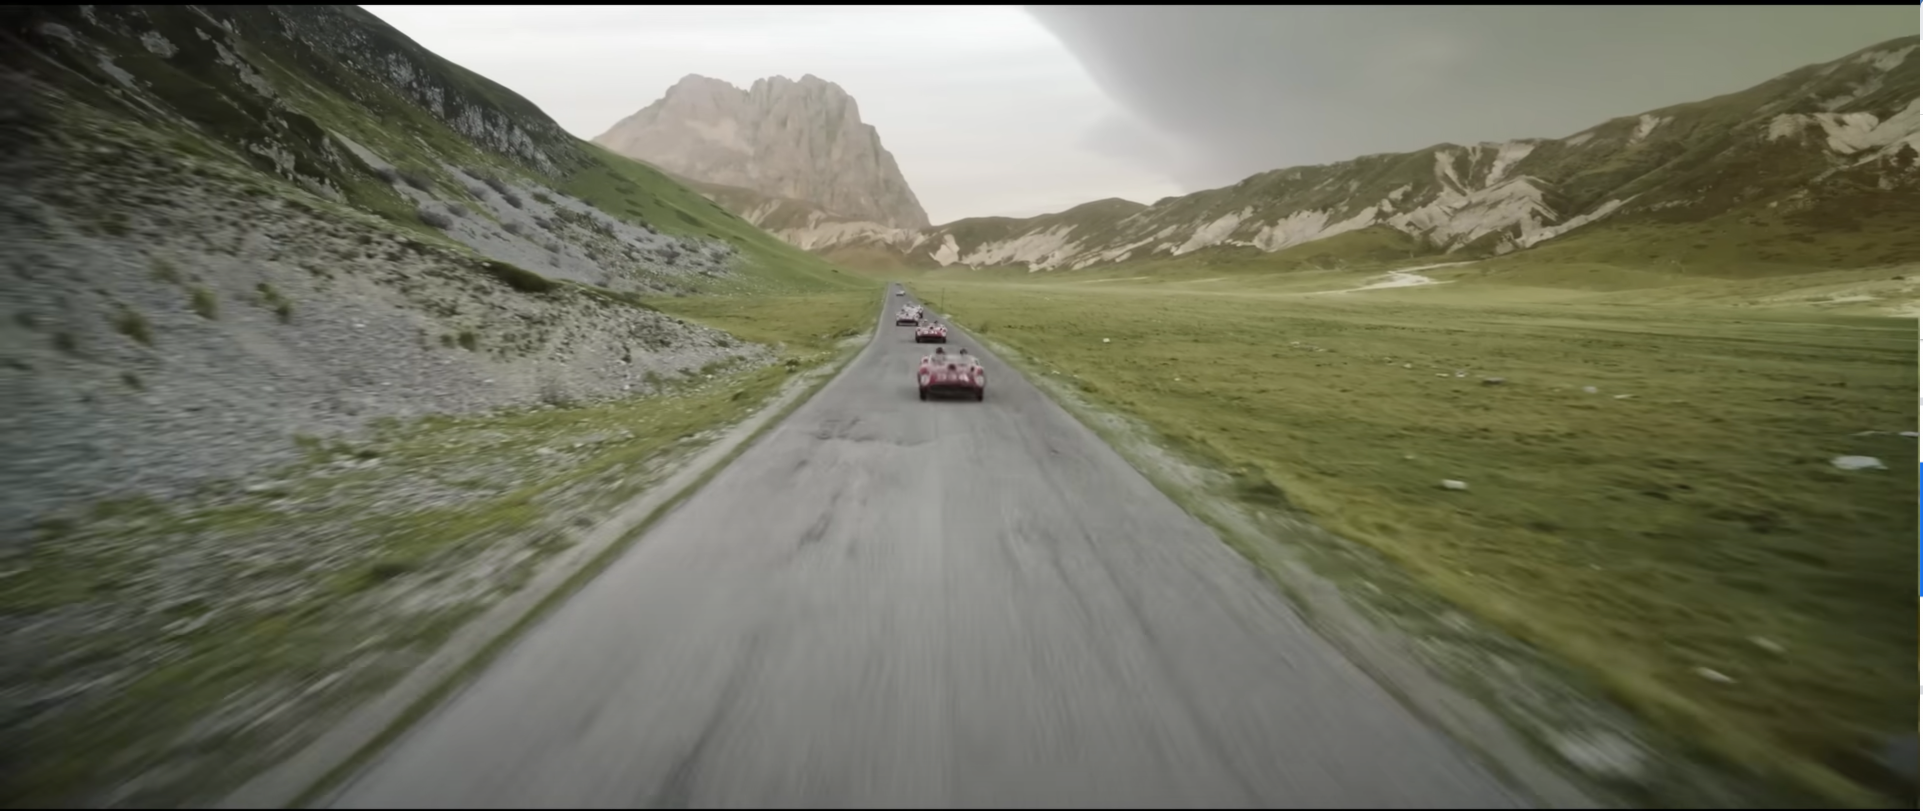 Buckle up for a blockbuster – Michael Mann's Ferrari looks, and sounds, epic